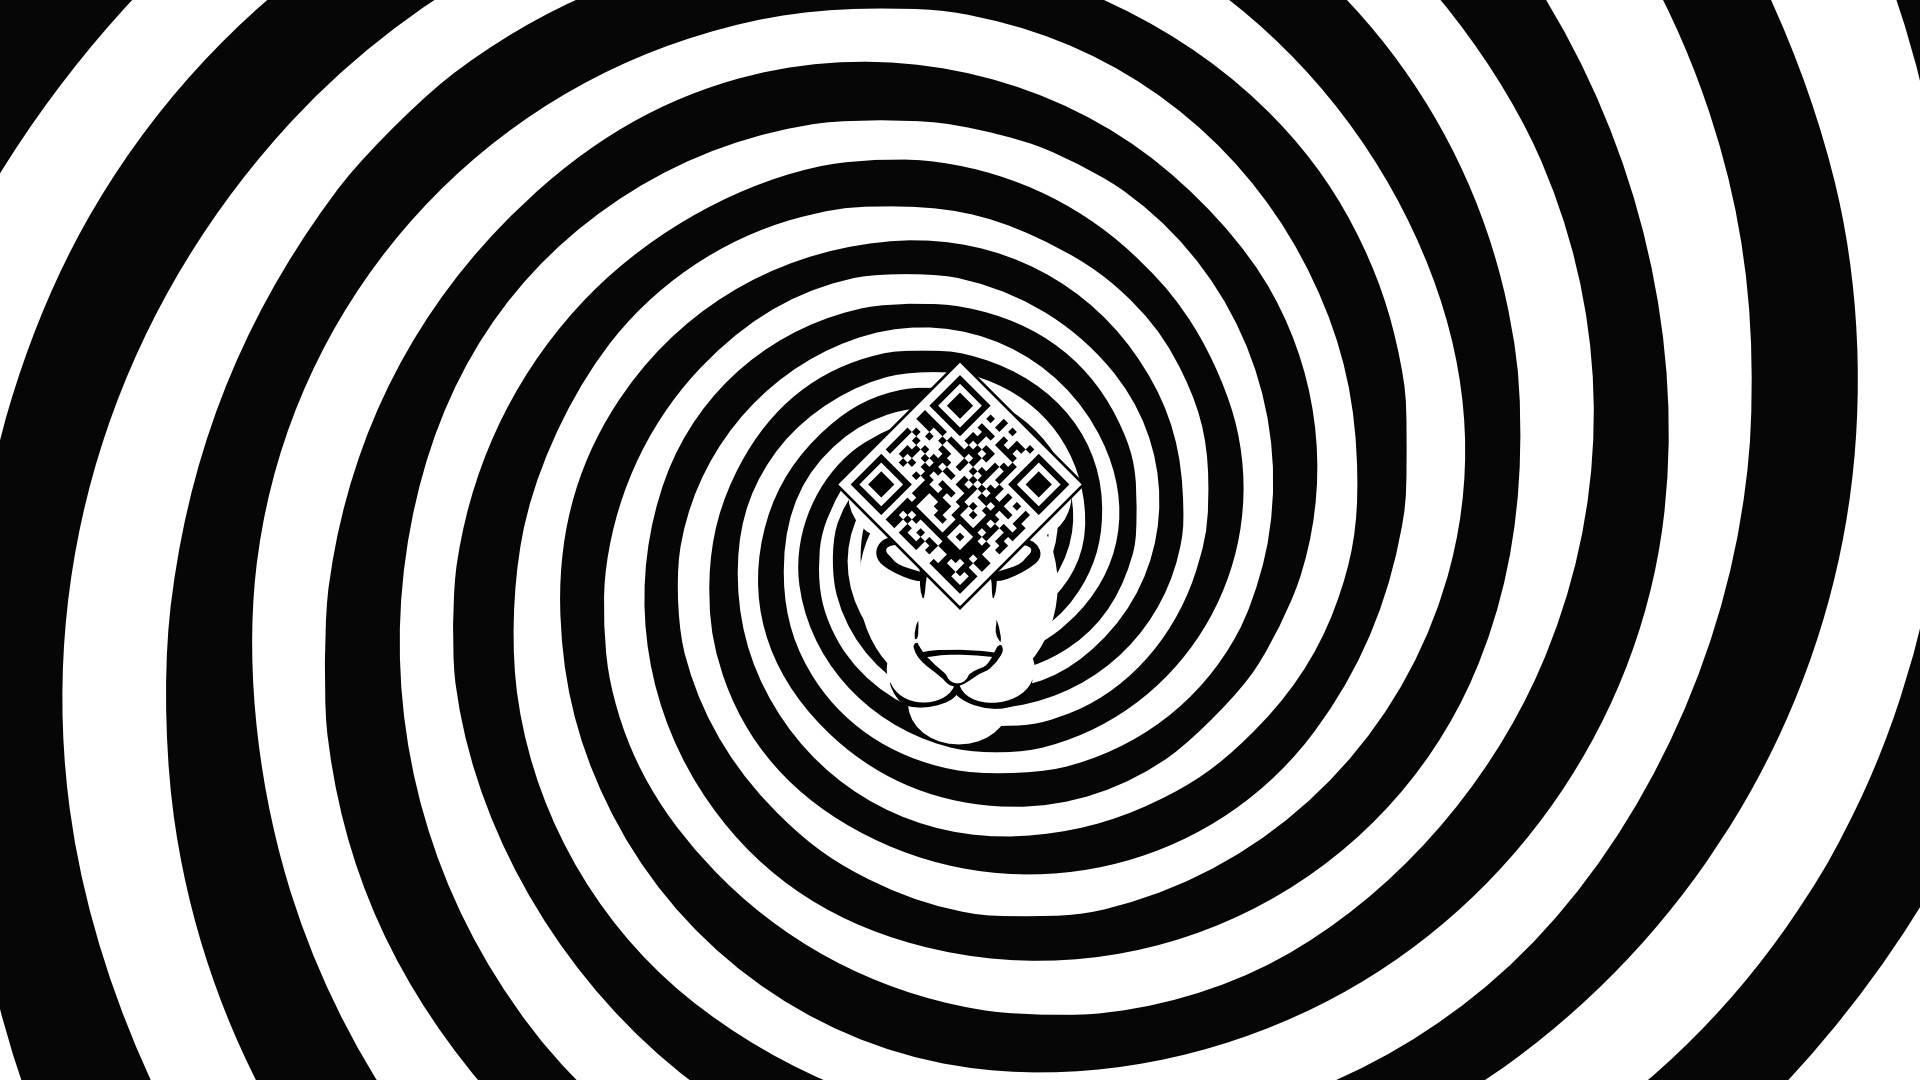 Qr Code In Front Of Hypnosis Swirl